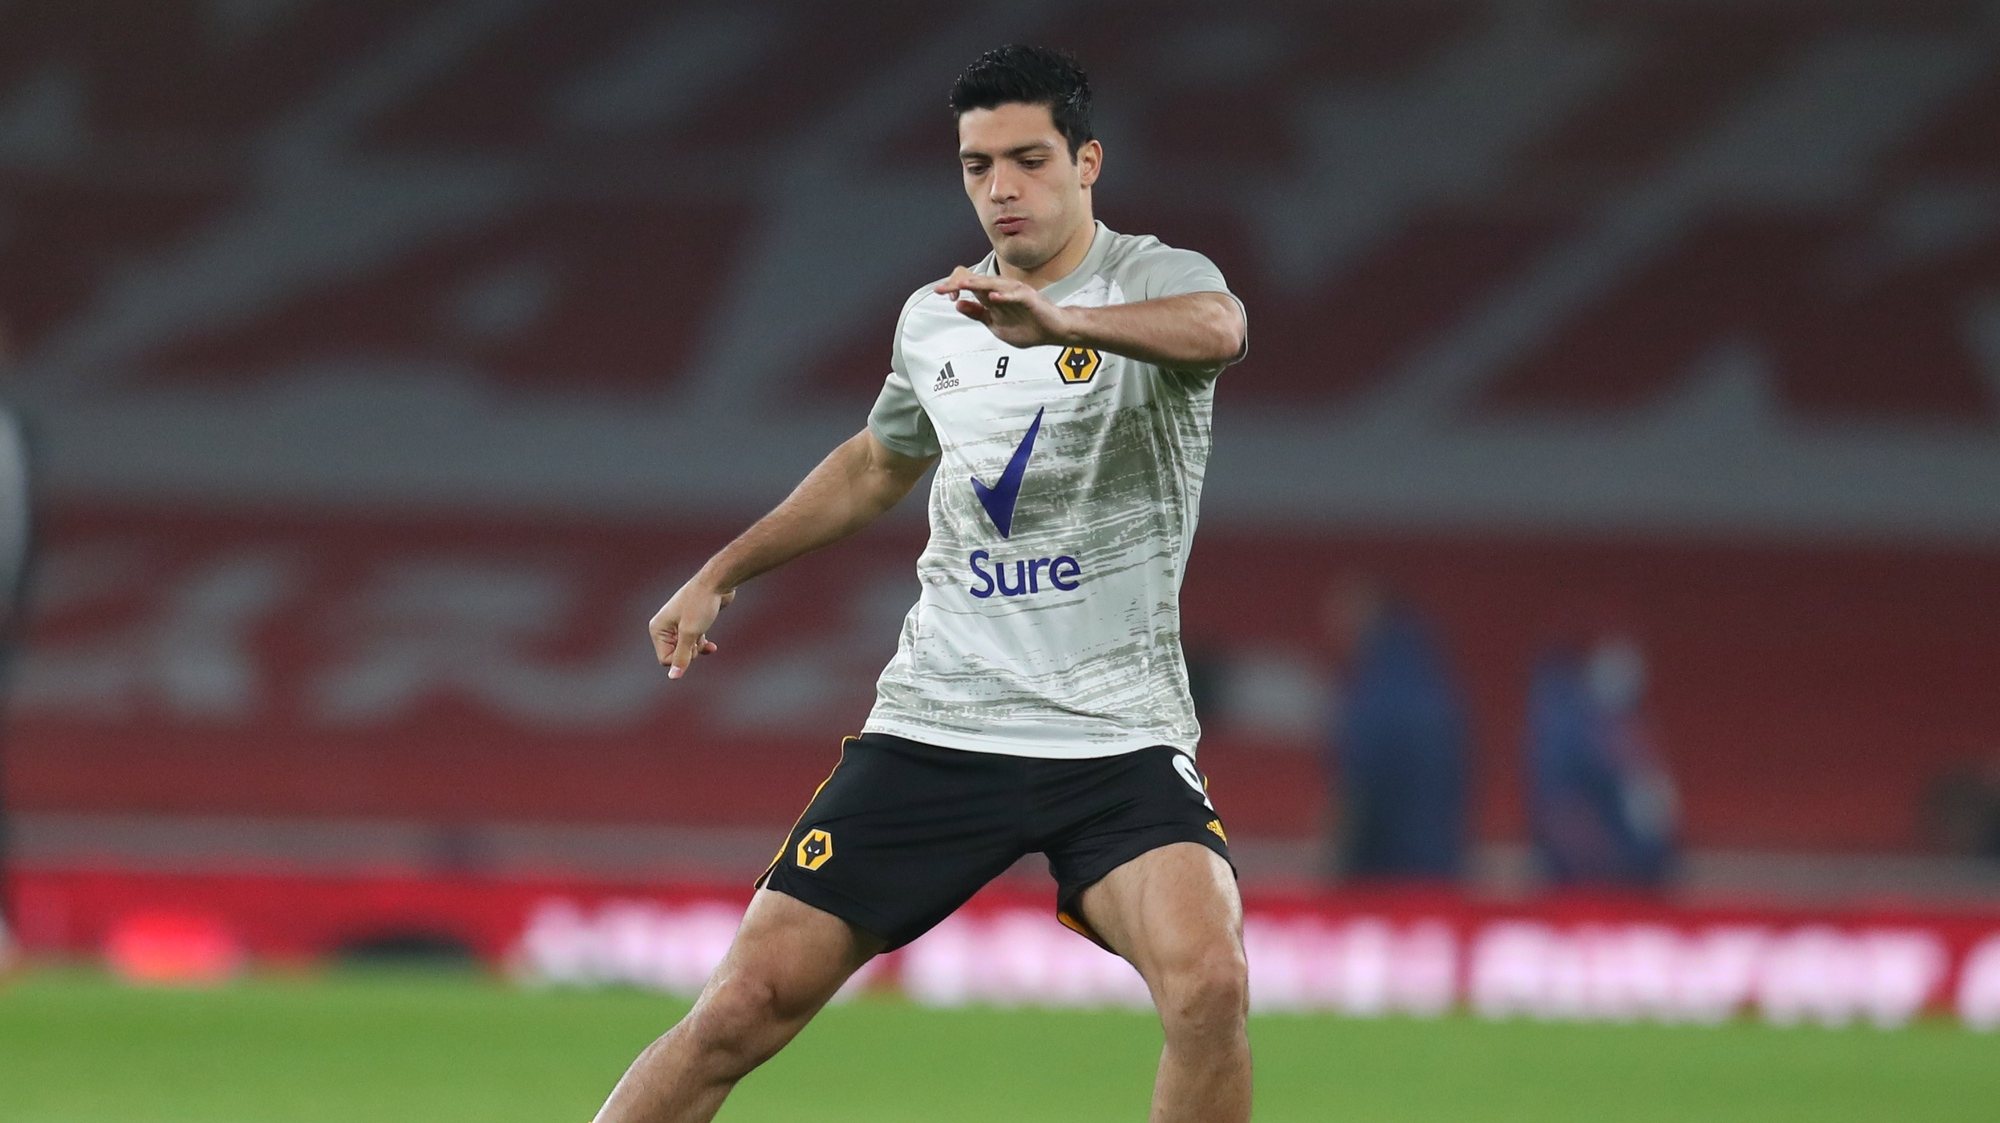 epa08852094 Raul Jimenez of Wolverhampton warms up ahead of the English Premier League soccer match between Arsenal FC and Wolverhampton Wanderers in London, Britain, 29 November 2020.  EPA/Catherine Ivill / POOL EDITORIAL USE ONLY. No use with unauthorized audio, video, data, fixture lists, club/league logos or &#039;live&#039; services. Online in-match use limited to 120 images, no video emulation. No use in betting, games or single club/league/player publications.